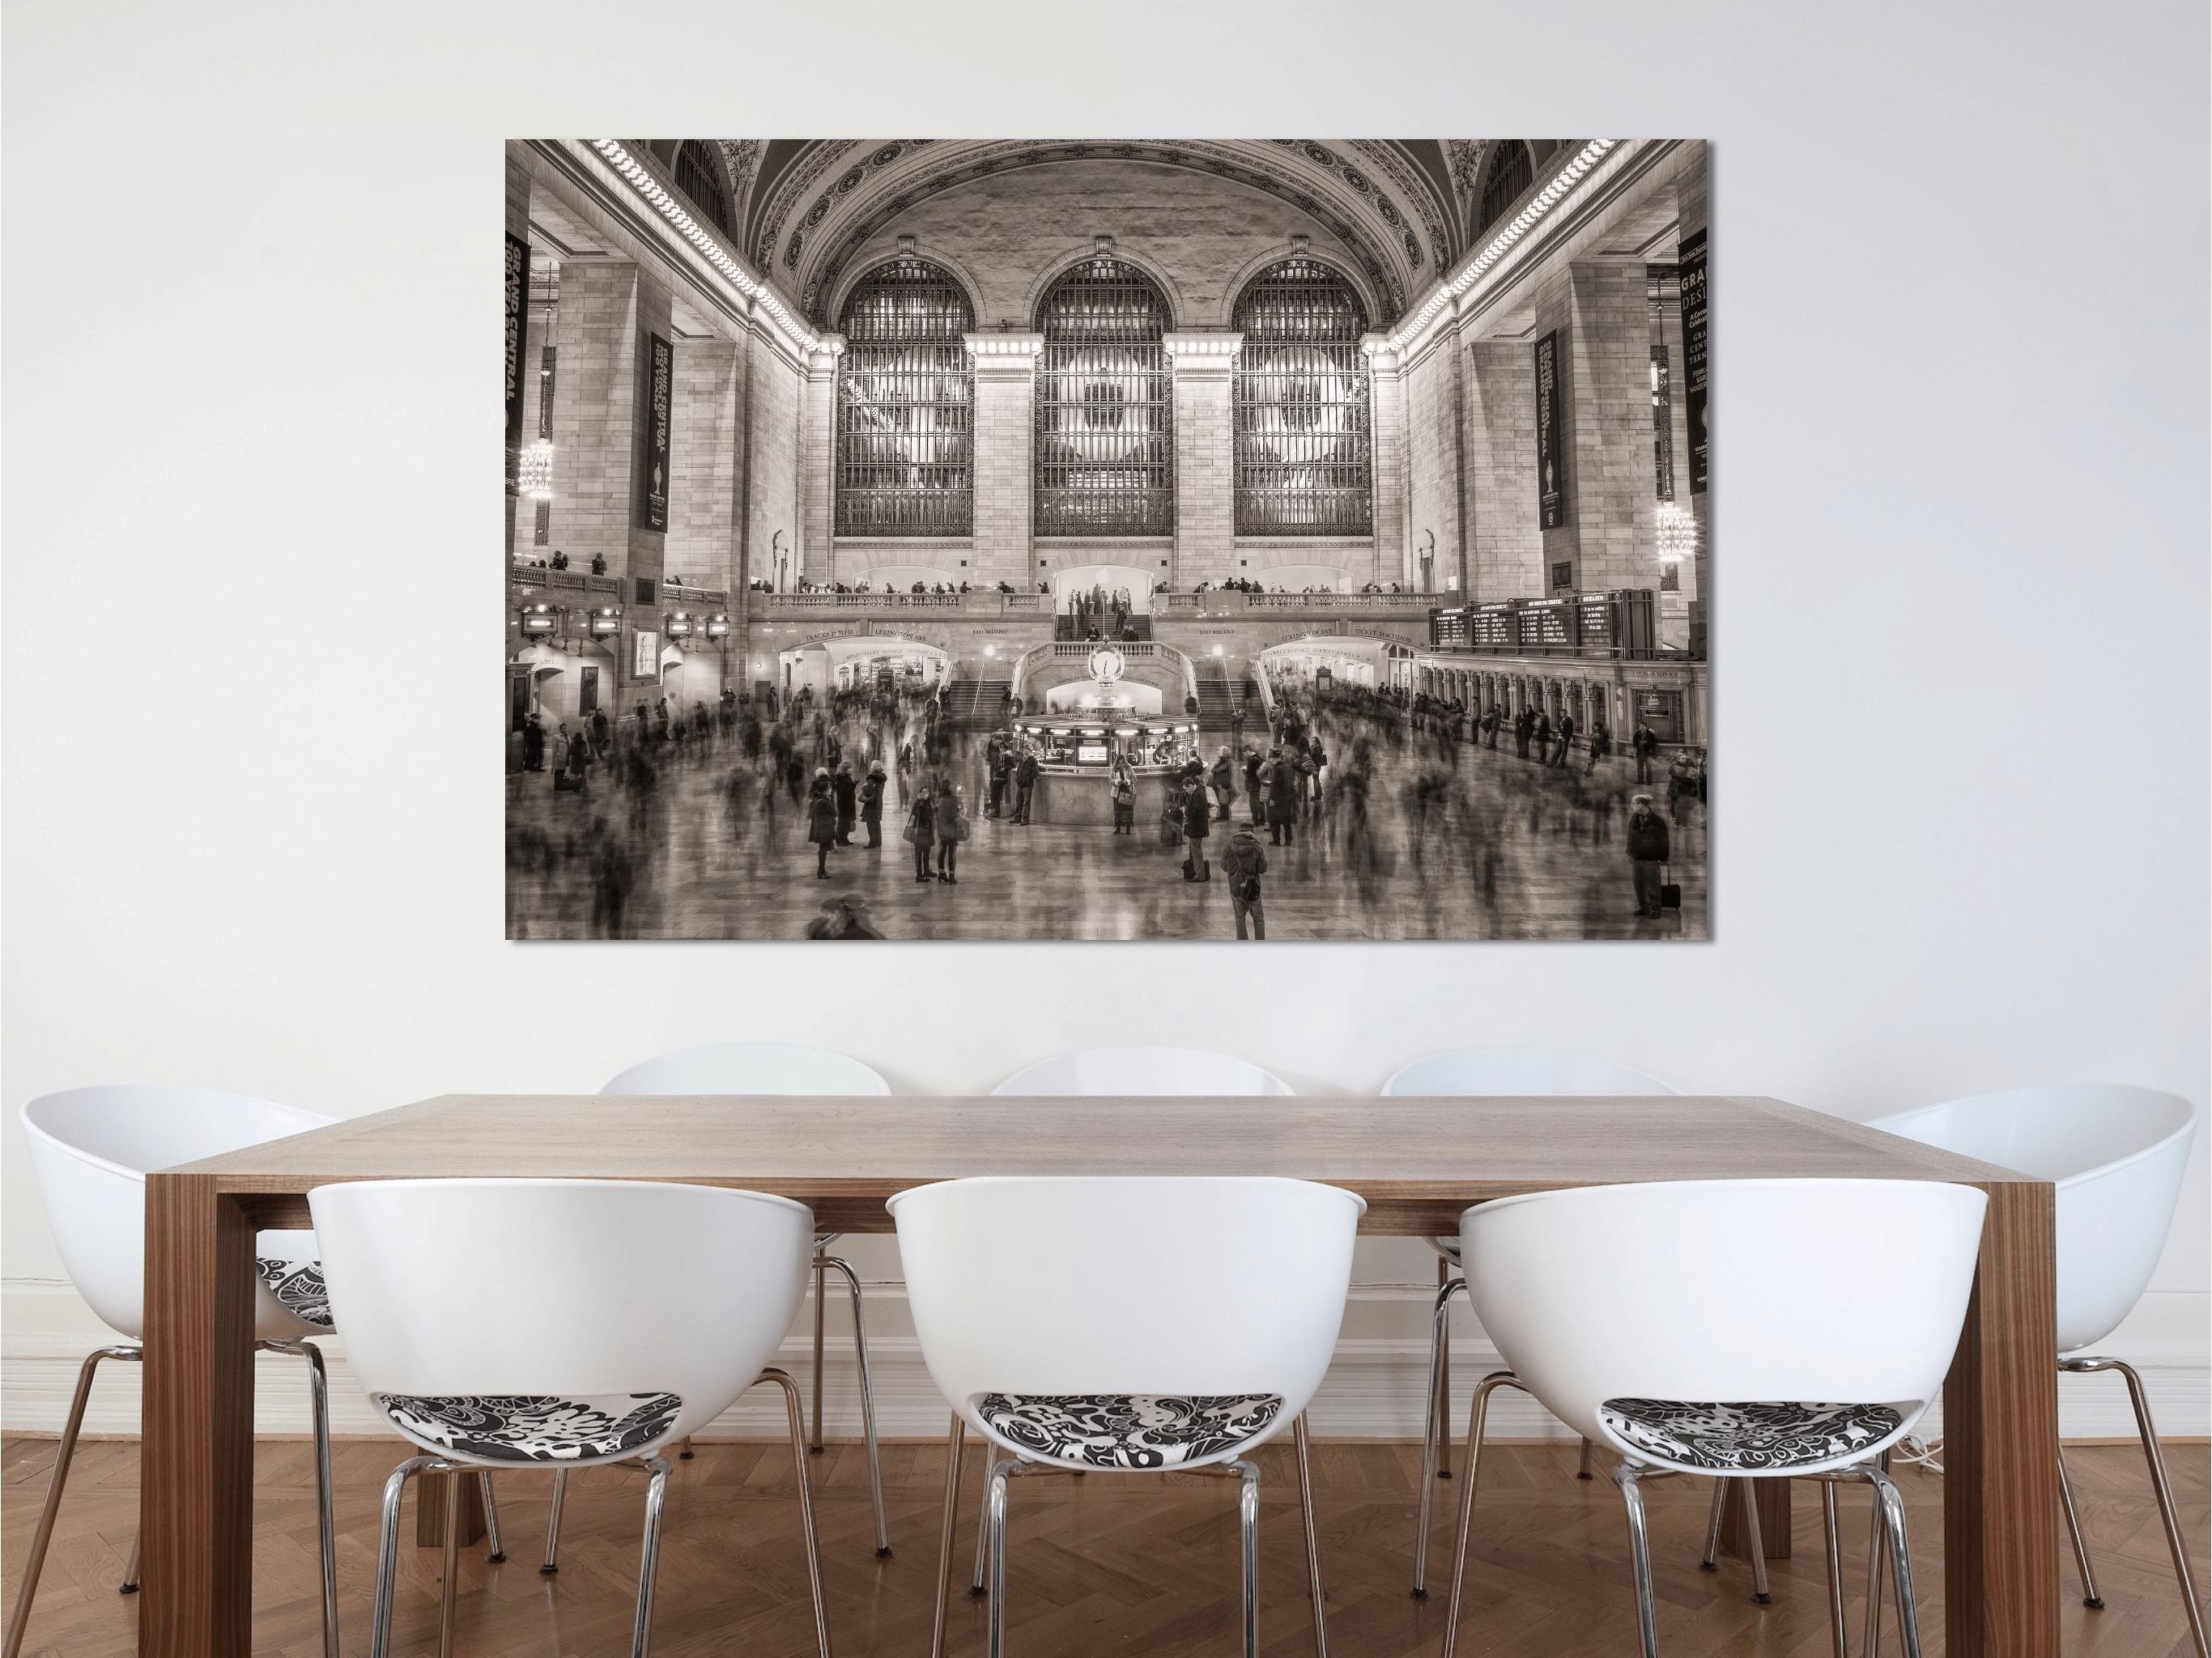 This black and white, urban architectural photograph by Peter Mendelson is taken in Grand Central in Manhattan. Filled with people milling through the large space, some are in focus while others are blurred shadows of movement. The grand